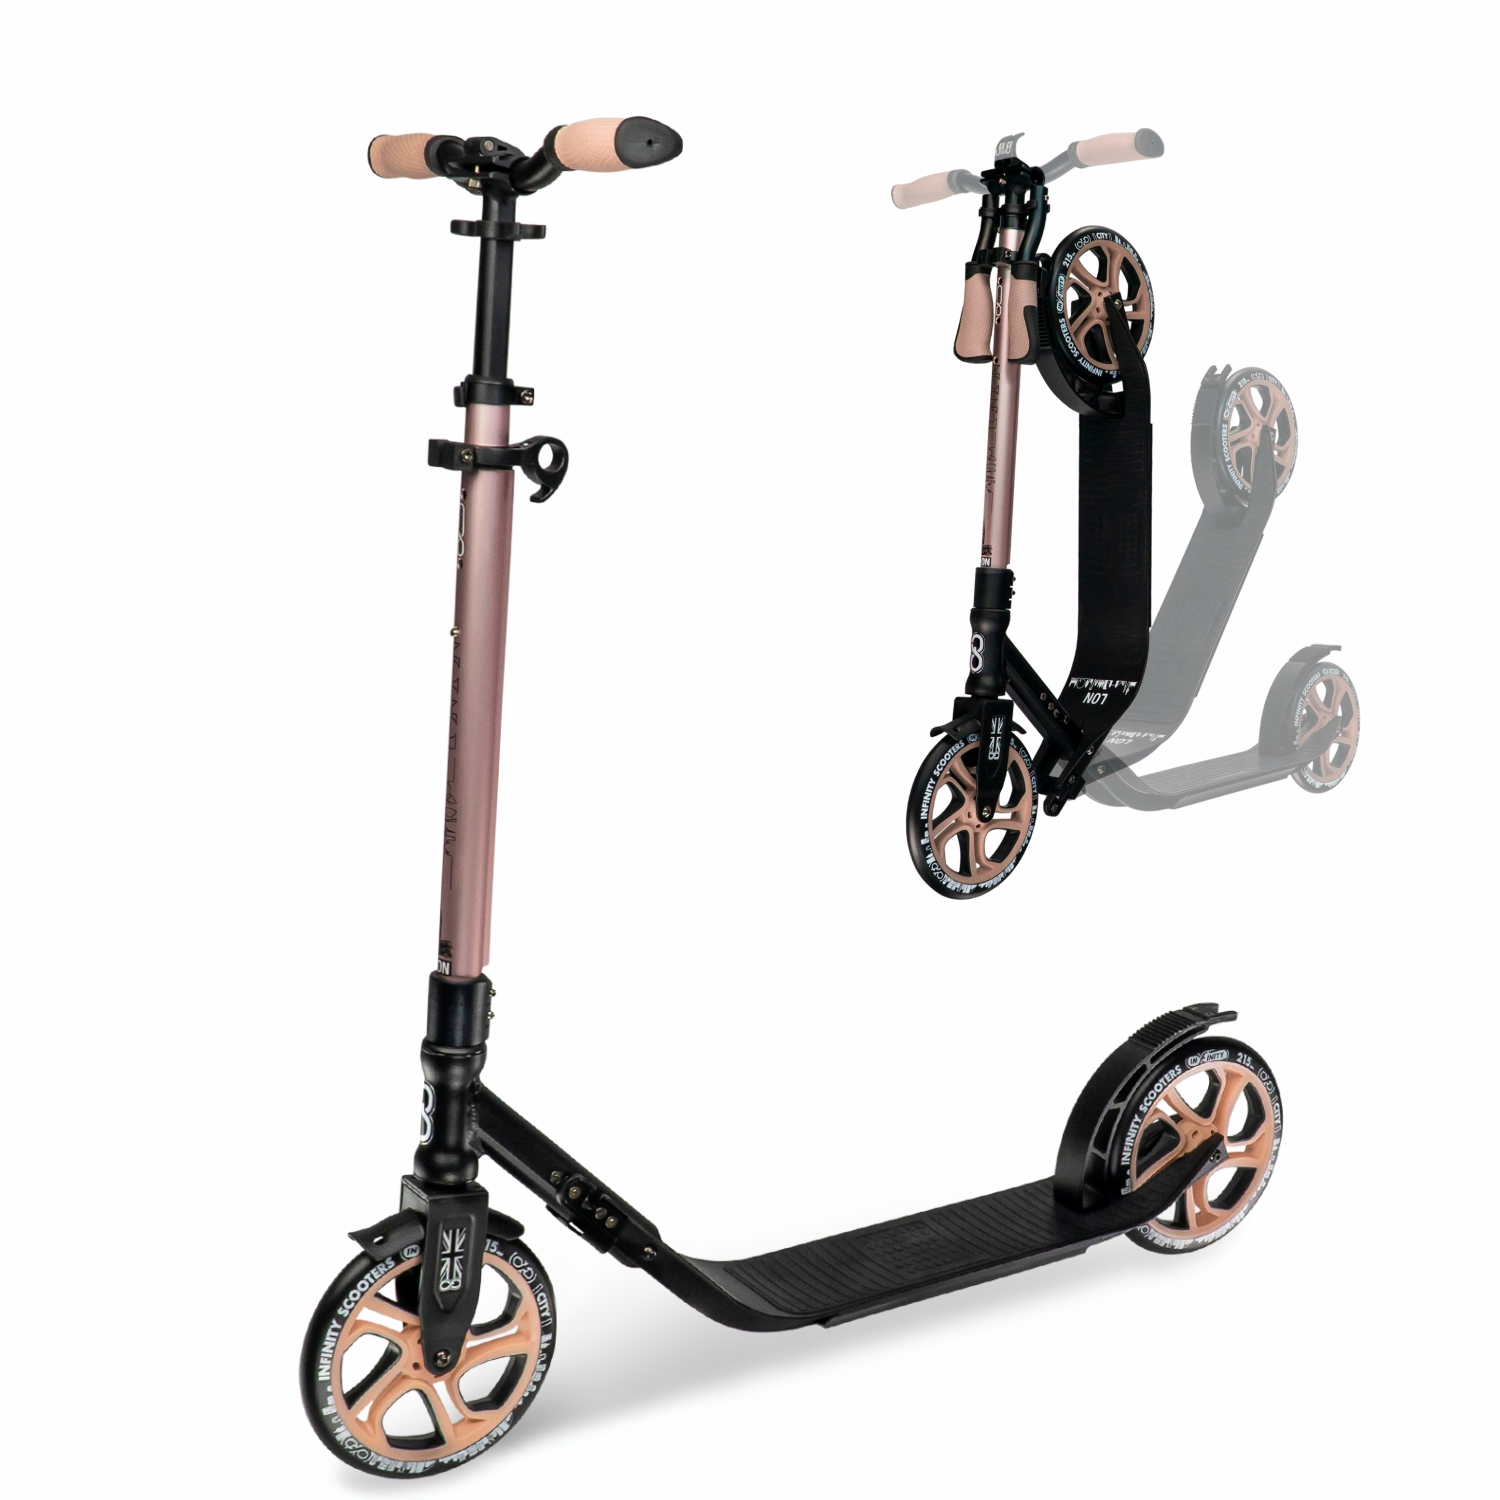 Crazy Skates London (LON) Foldable Kick Scooter - Great scooters for teens an...